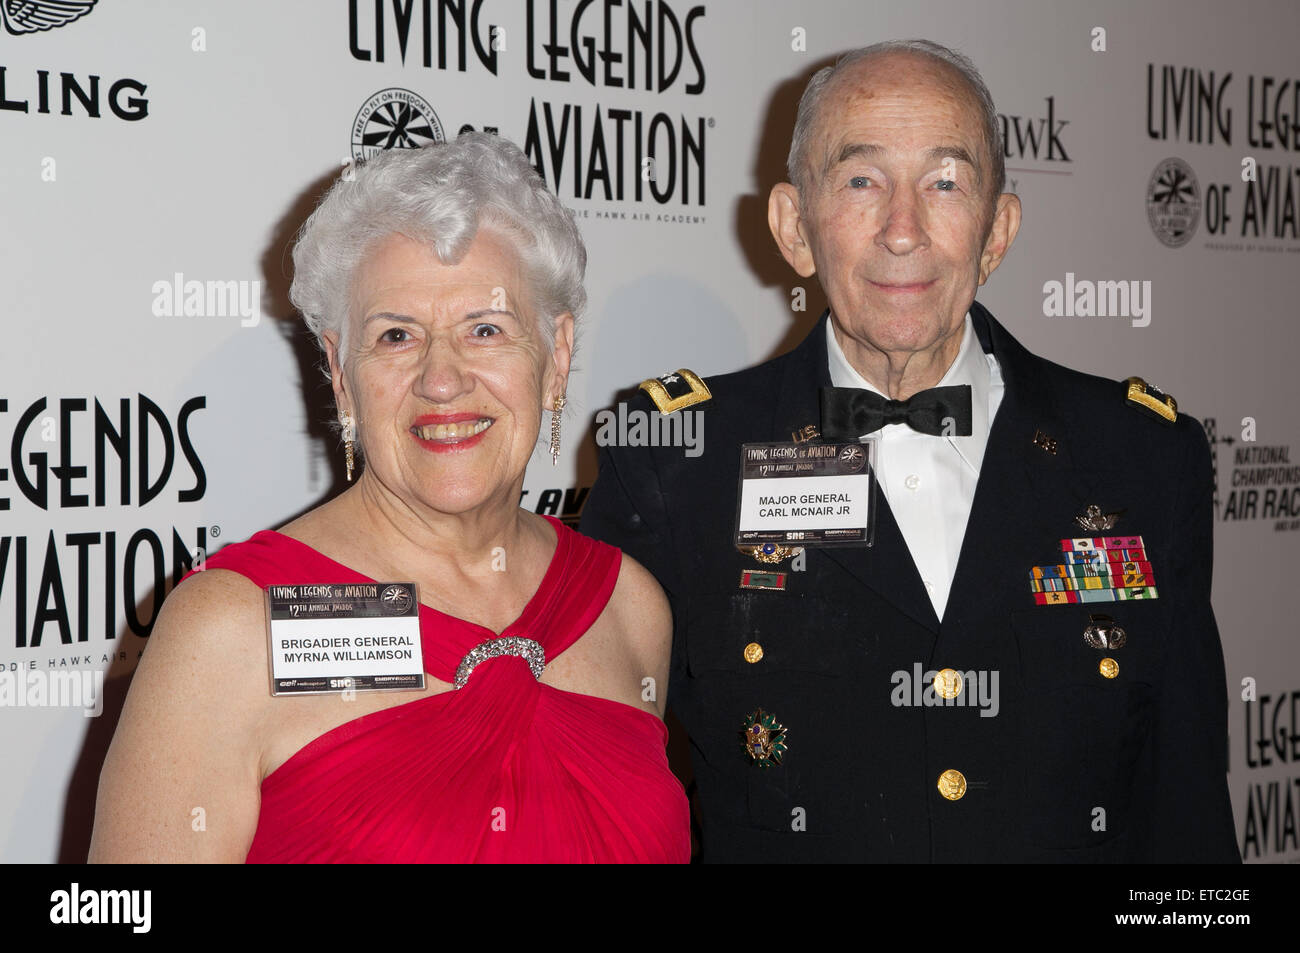 12th Annual Living Legends of Aviation Awards at The Beverly Hilton - Arrivals  Featuring: Myrna Williamson, Carl McNair Jr. Where: Los Angeles, California, United States When: 16 Jan 2015 Credit: Brian To/WENN.com Stock Photo